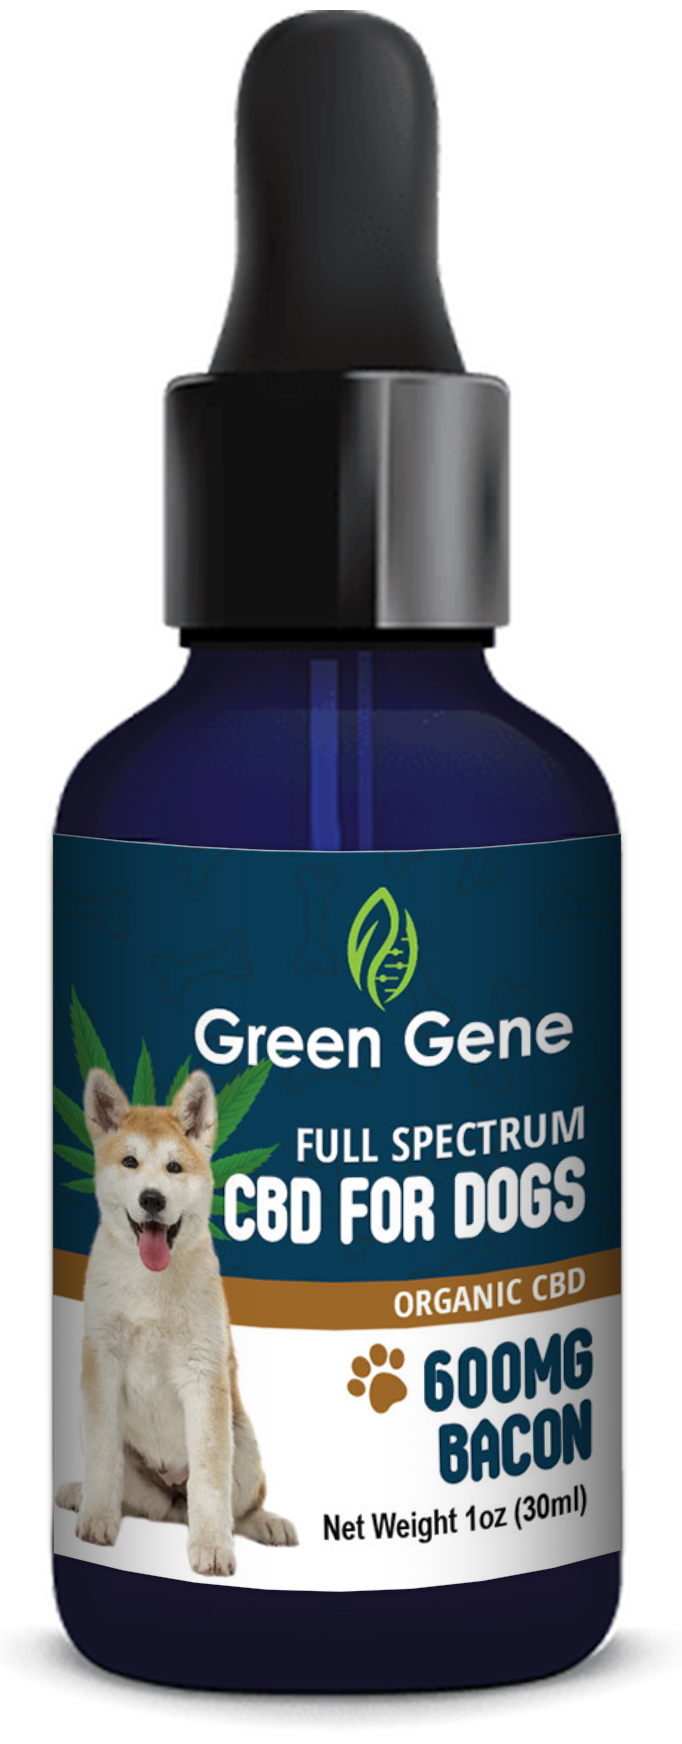 Full Spectrum CBD Oil for Dogs Bacon Flavor for Canine Happiness (300MG-600MG) - Headshop.com